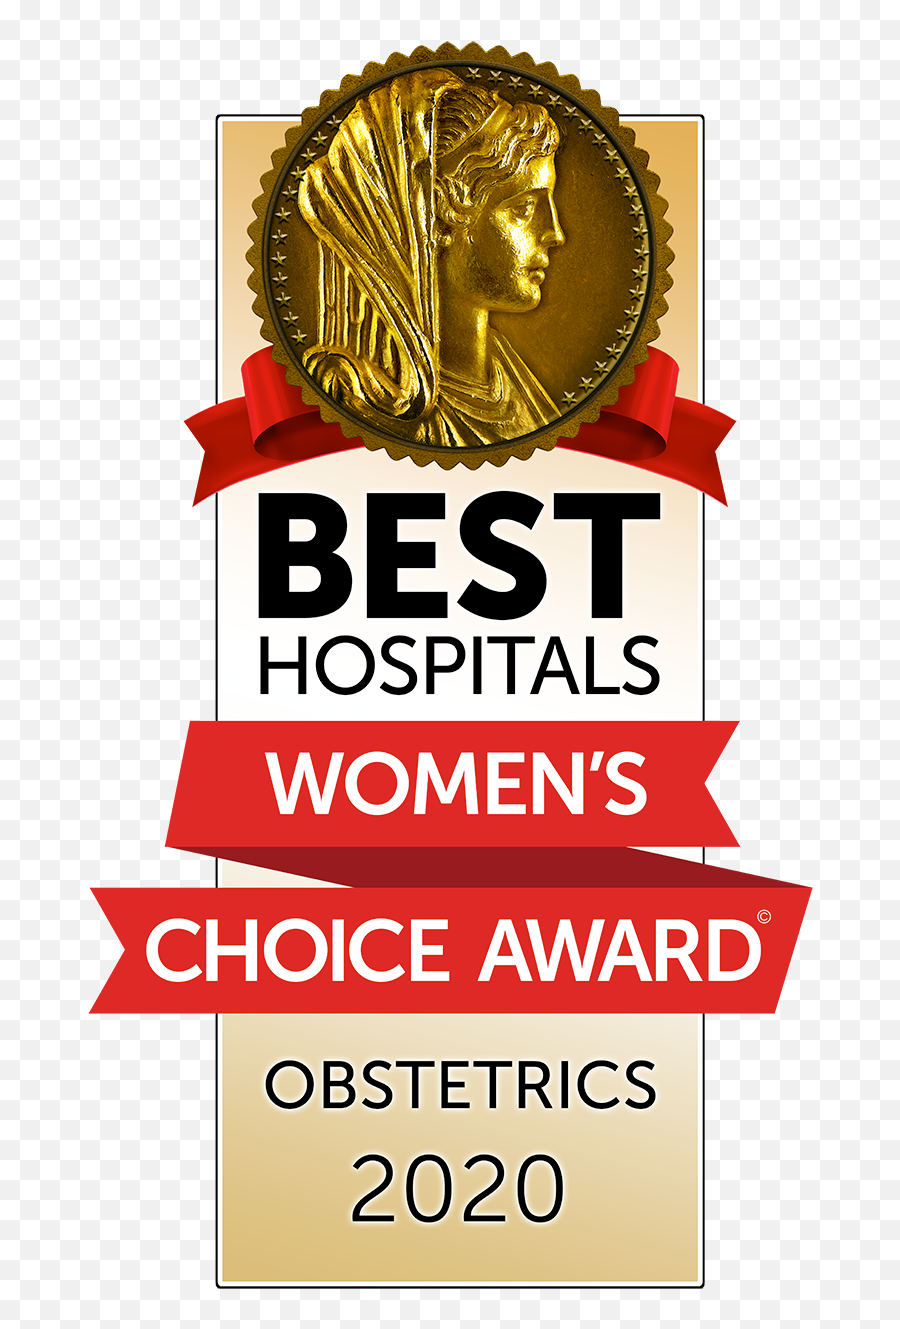 Overlook Medical Center - Hospital In New Jersey Atlantic Choice Award Emoji,What Do The Snapchat Emojis Mean 1004